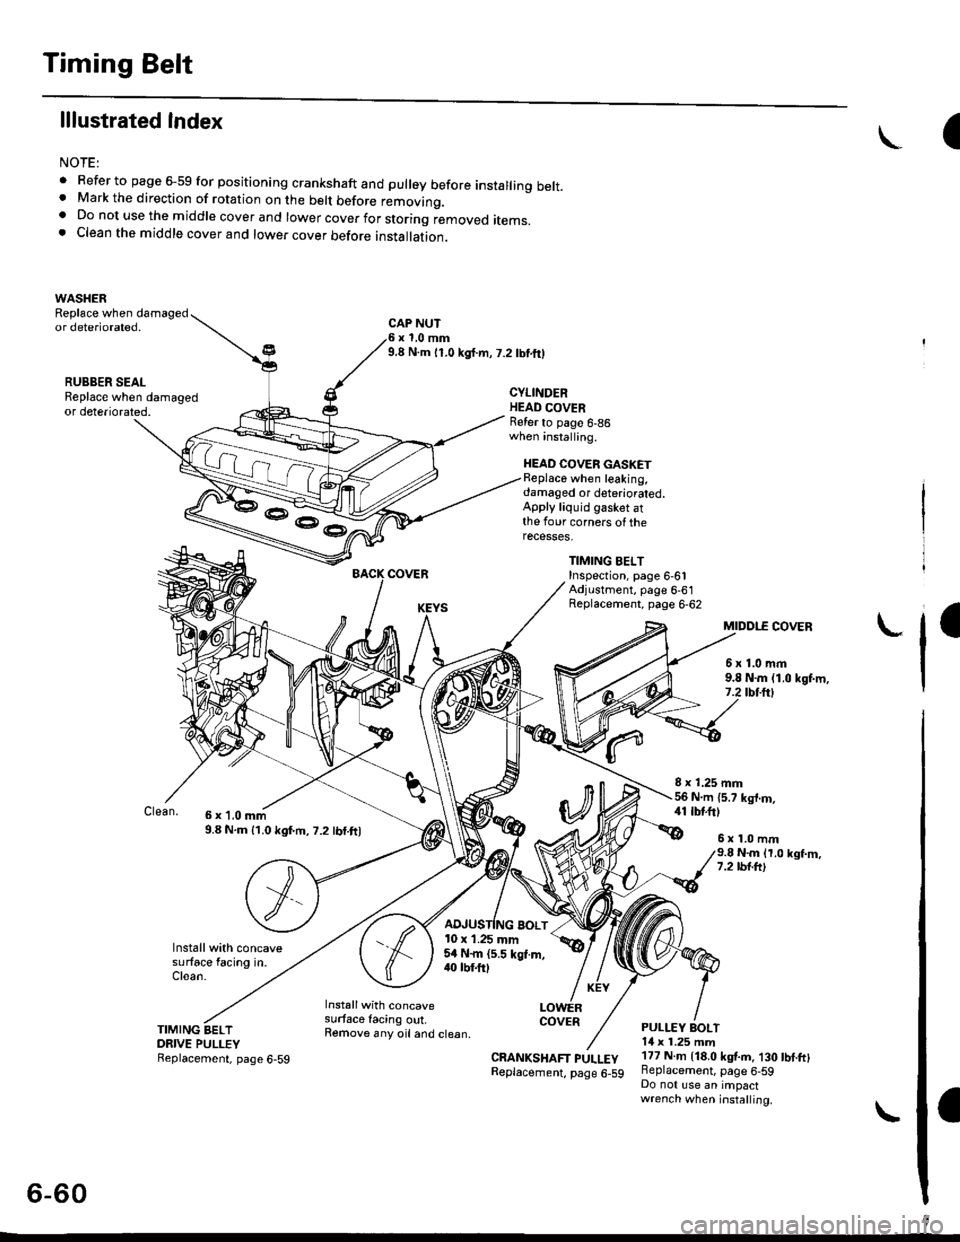 HONDA CIVIC 1998 6.G Owners Manual Timing Belt
lllustrated Index
NOTE:
. Refer to page 6-59 for positioning crankshaft and pulley before installing belt.. Mark the direction of rotation on the belt before removino.a Do not use the midd